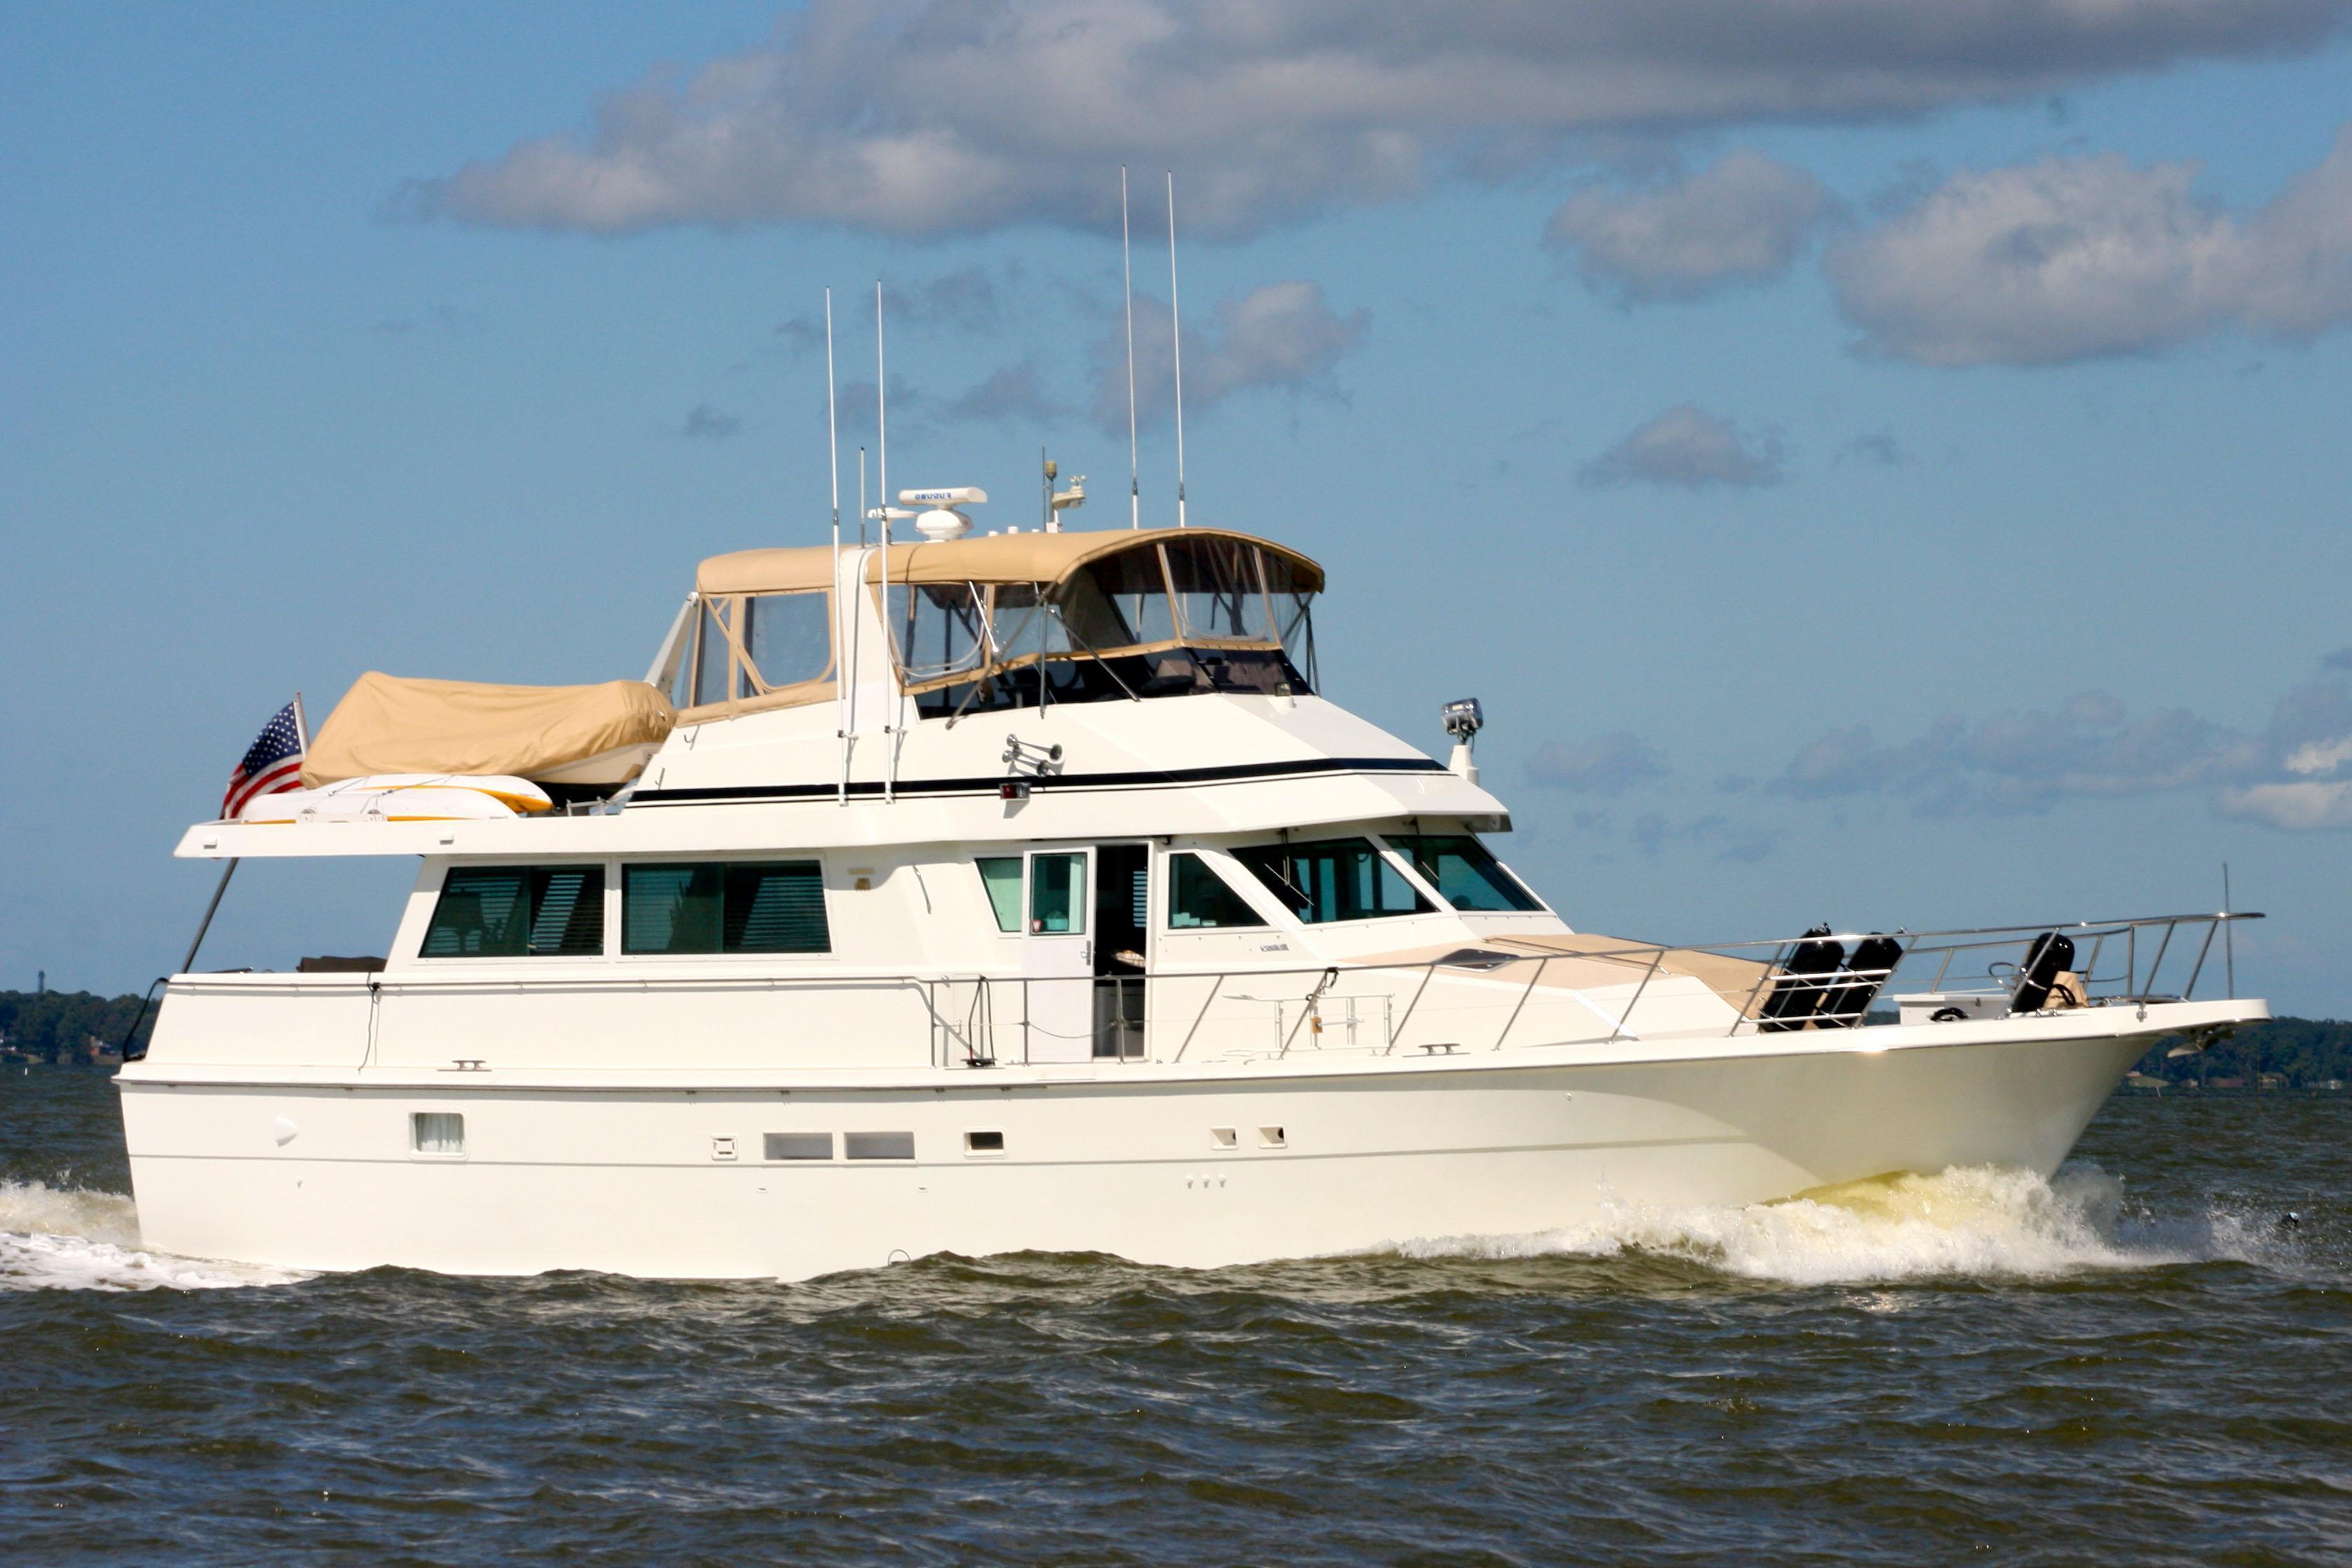 Hatteras Extended Deck M.Y., Smithfield